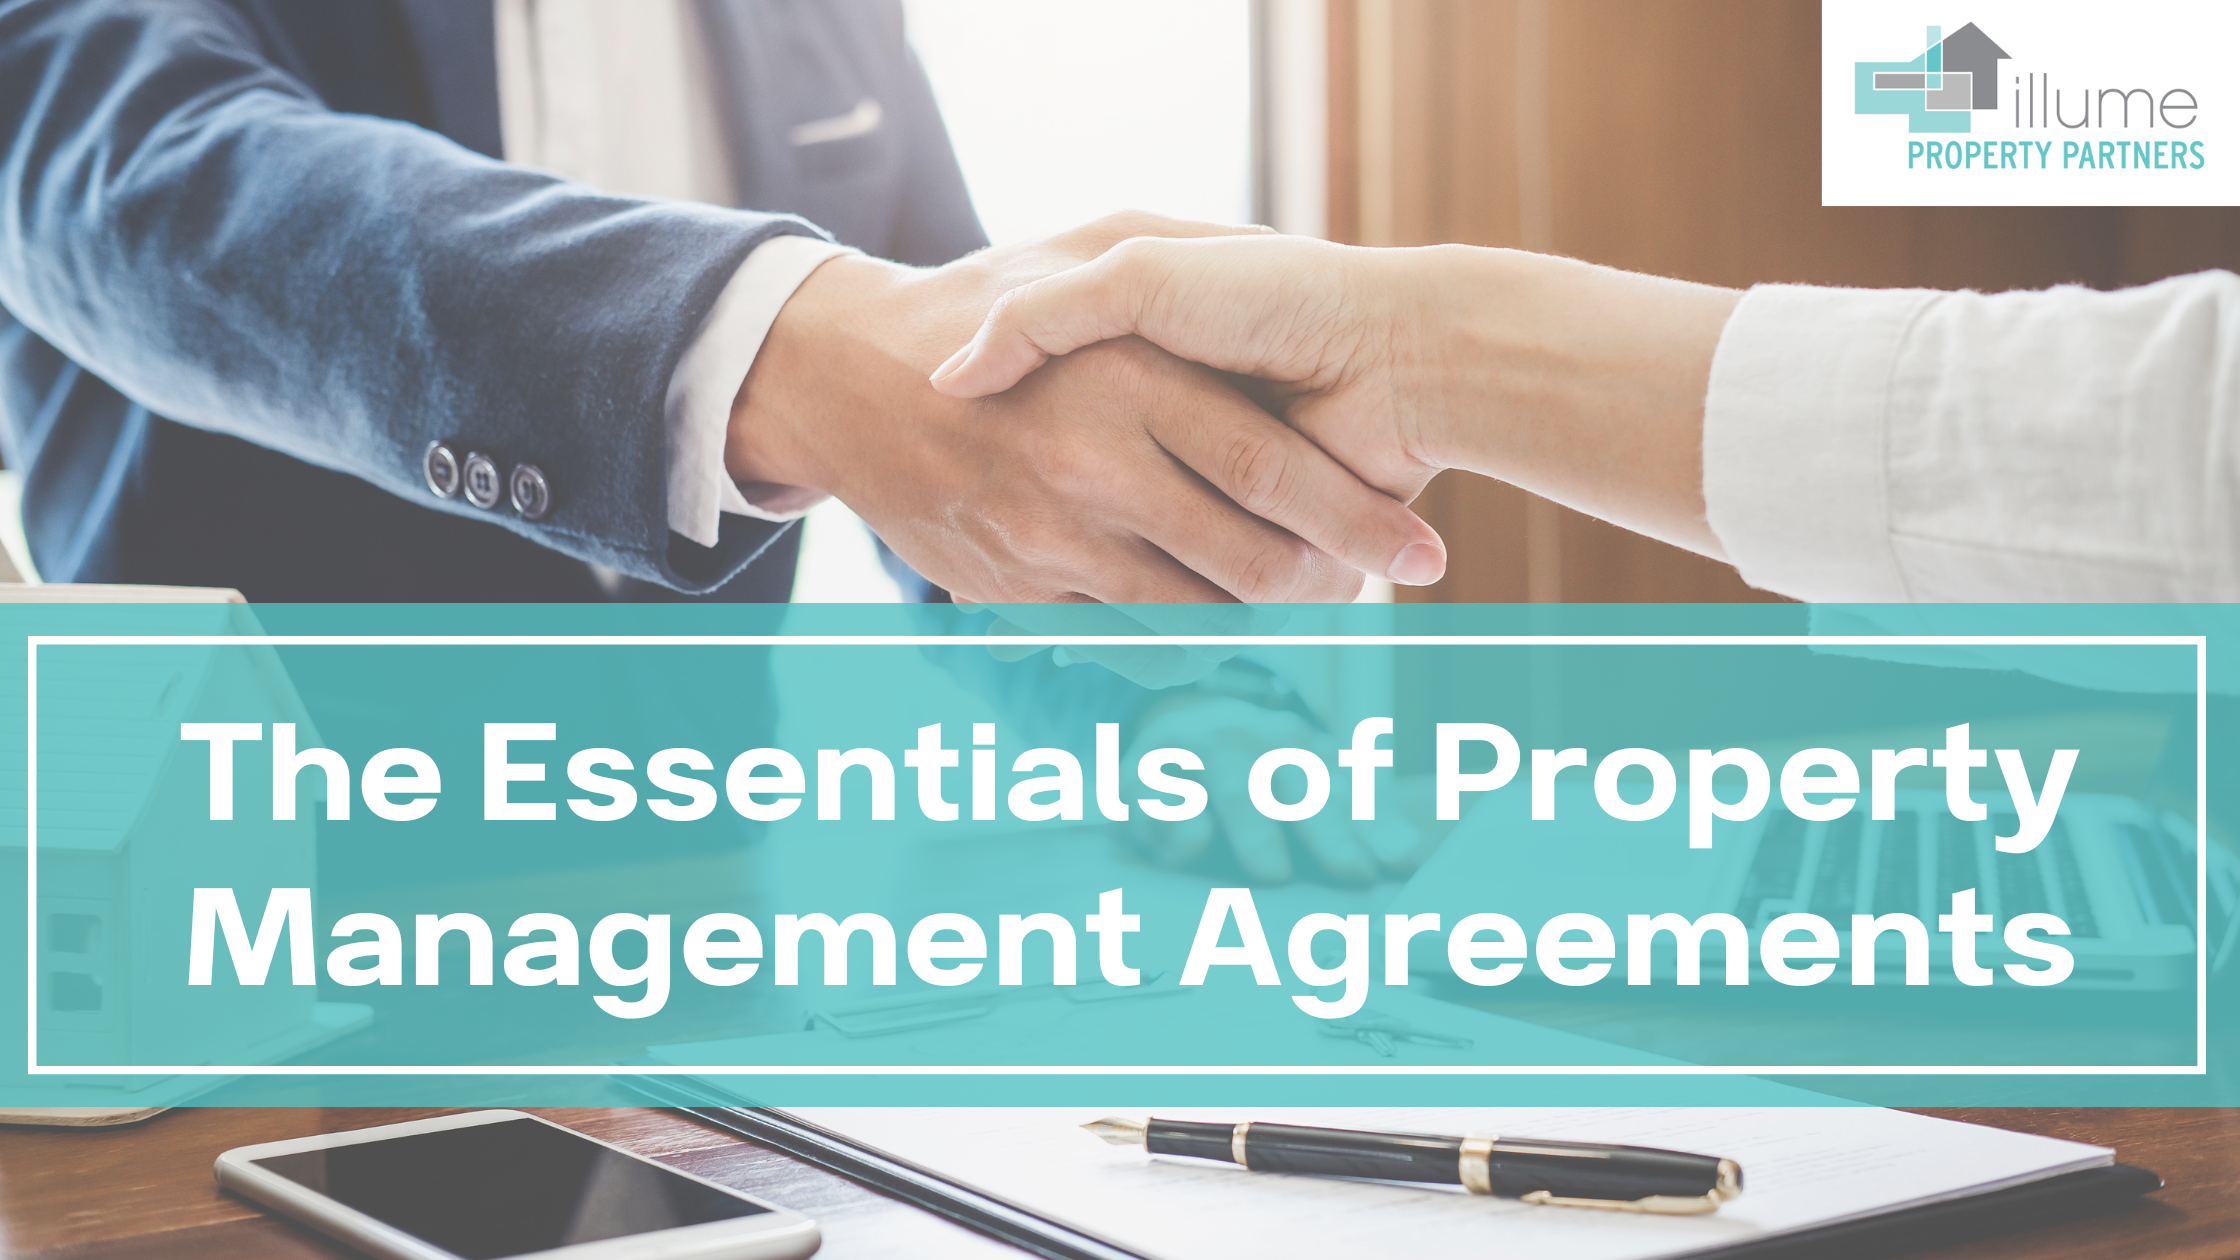 The Essentials of Property Management Agreements